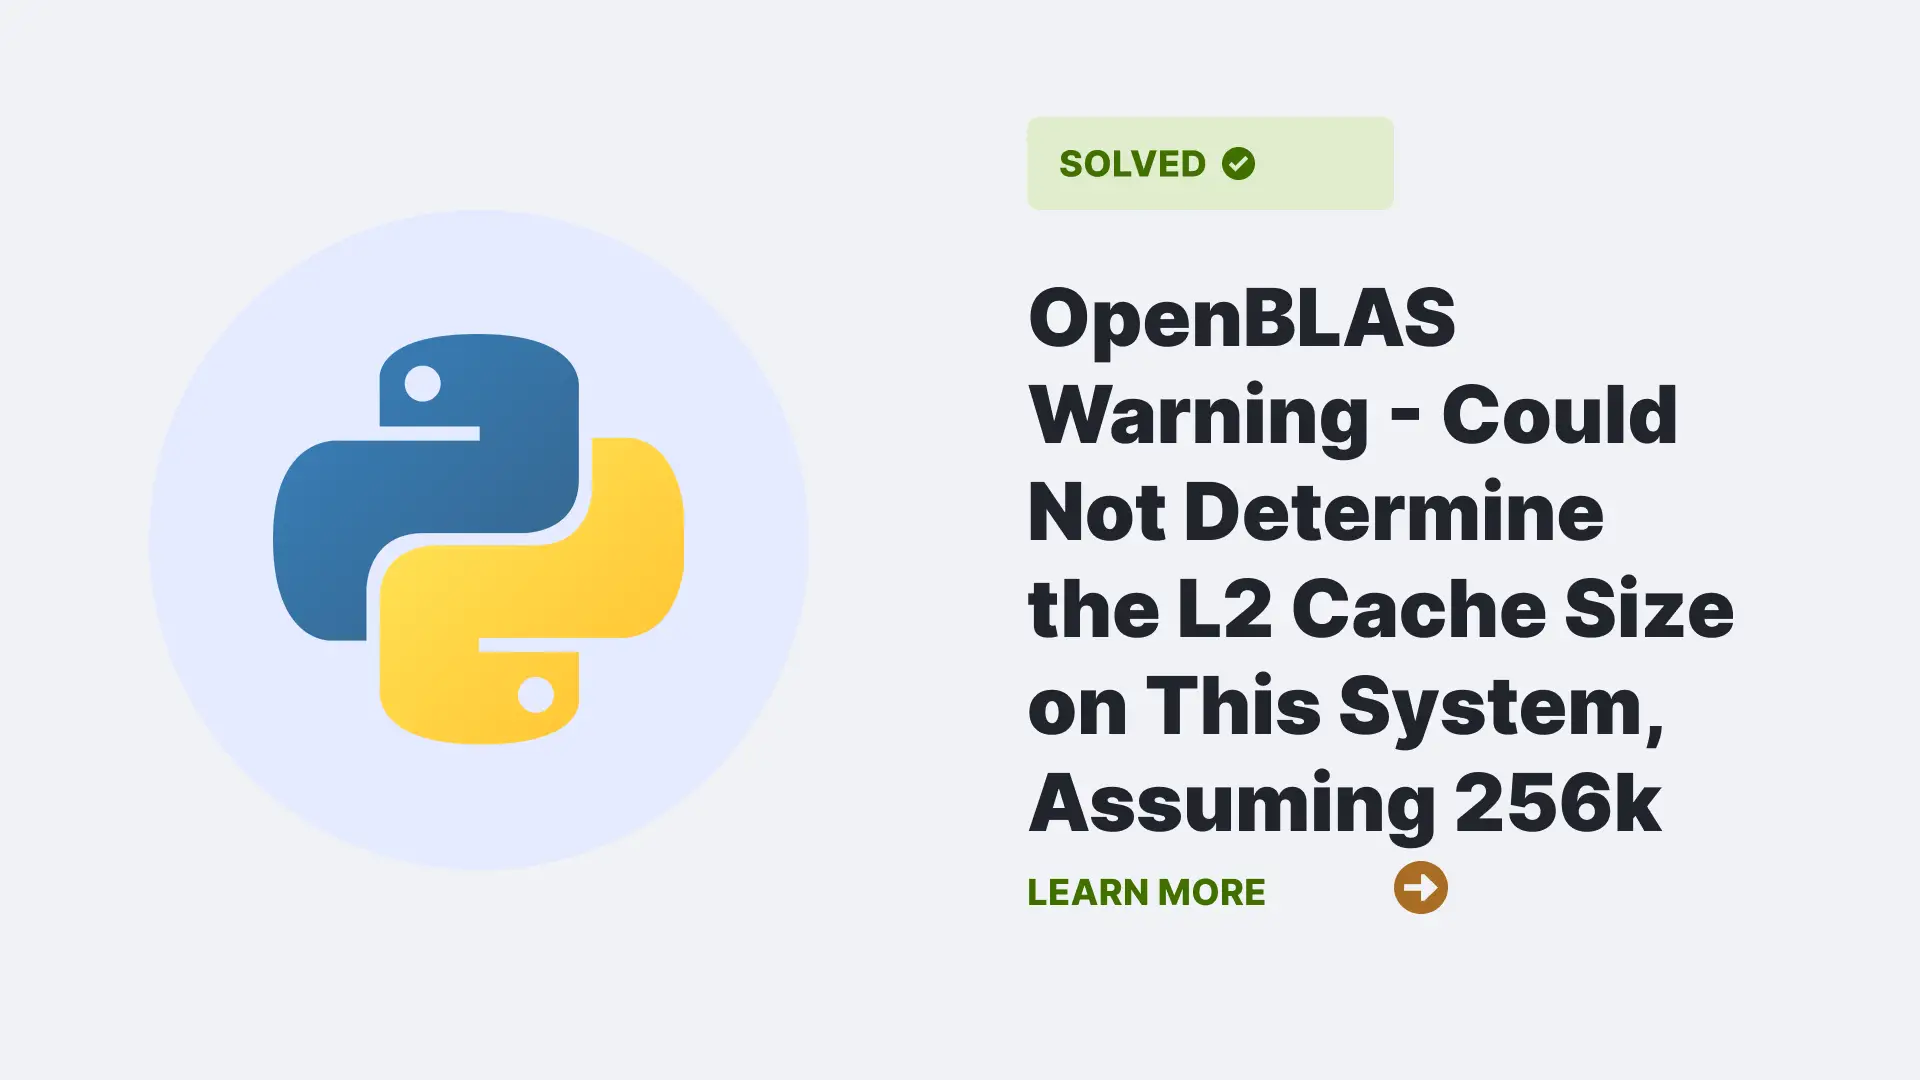 OpenBLAS Warning - Could Not Determine the L2 Cache Size on This System, Assuming 256k